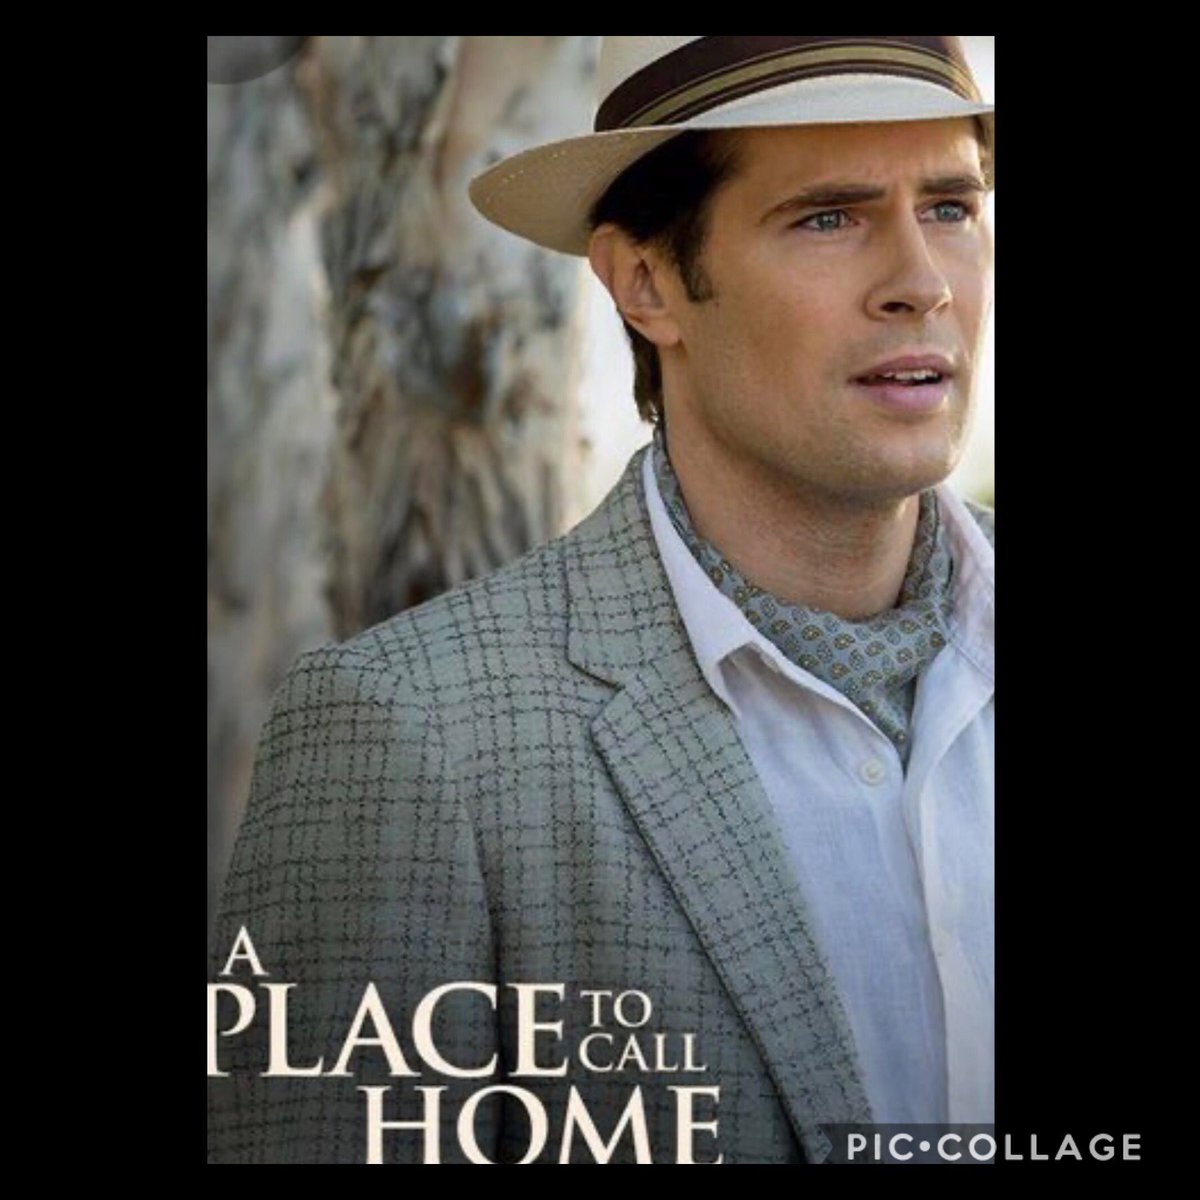 💖🌻💖🦋💖Happy Throwback Thursday Sassenachs from Australia 🇦🇺 Wishing Everyone a Safe and Happy Day 💖🐨💖🕊⛄️🌻☀️☔️🦘❄️🐶🎉🦄😎🍾🐬#davidberry #aplacetocallhome #jamesbligh #outlander #lordjohngrey #keepsmiling 😎